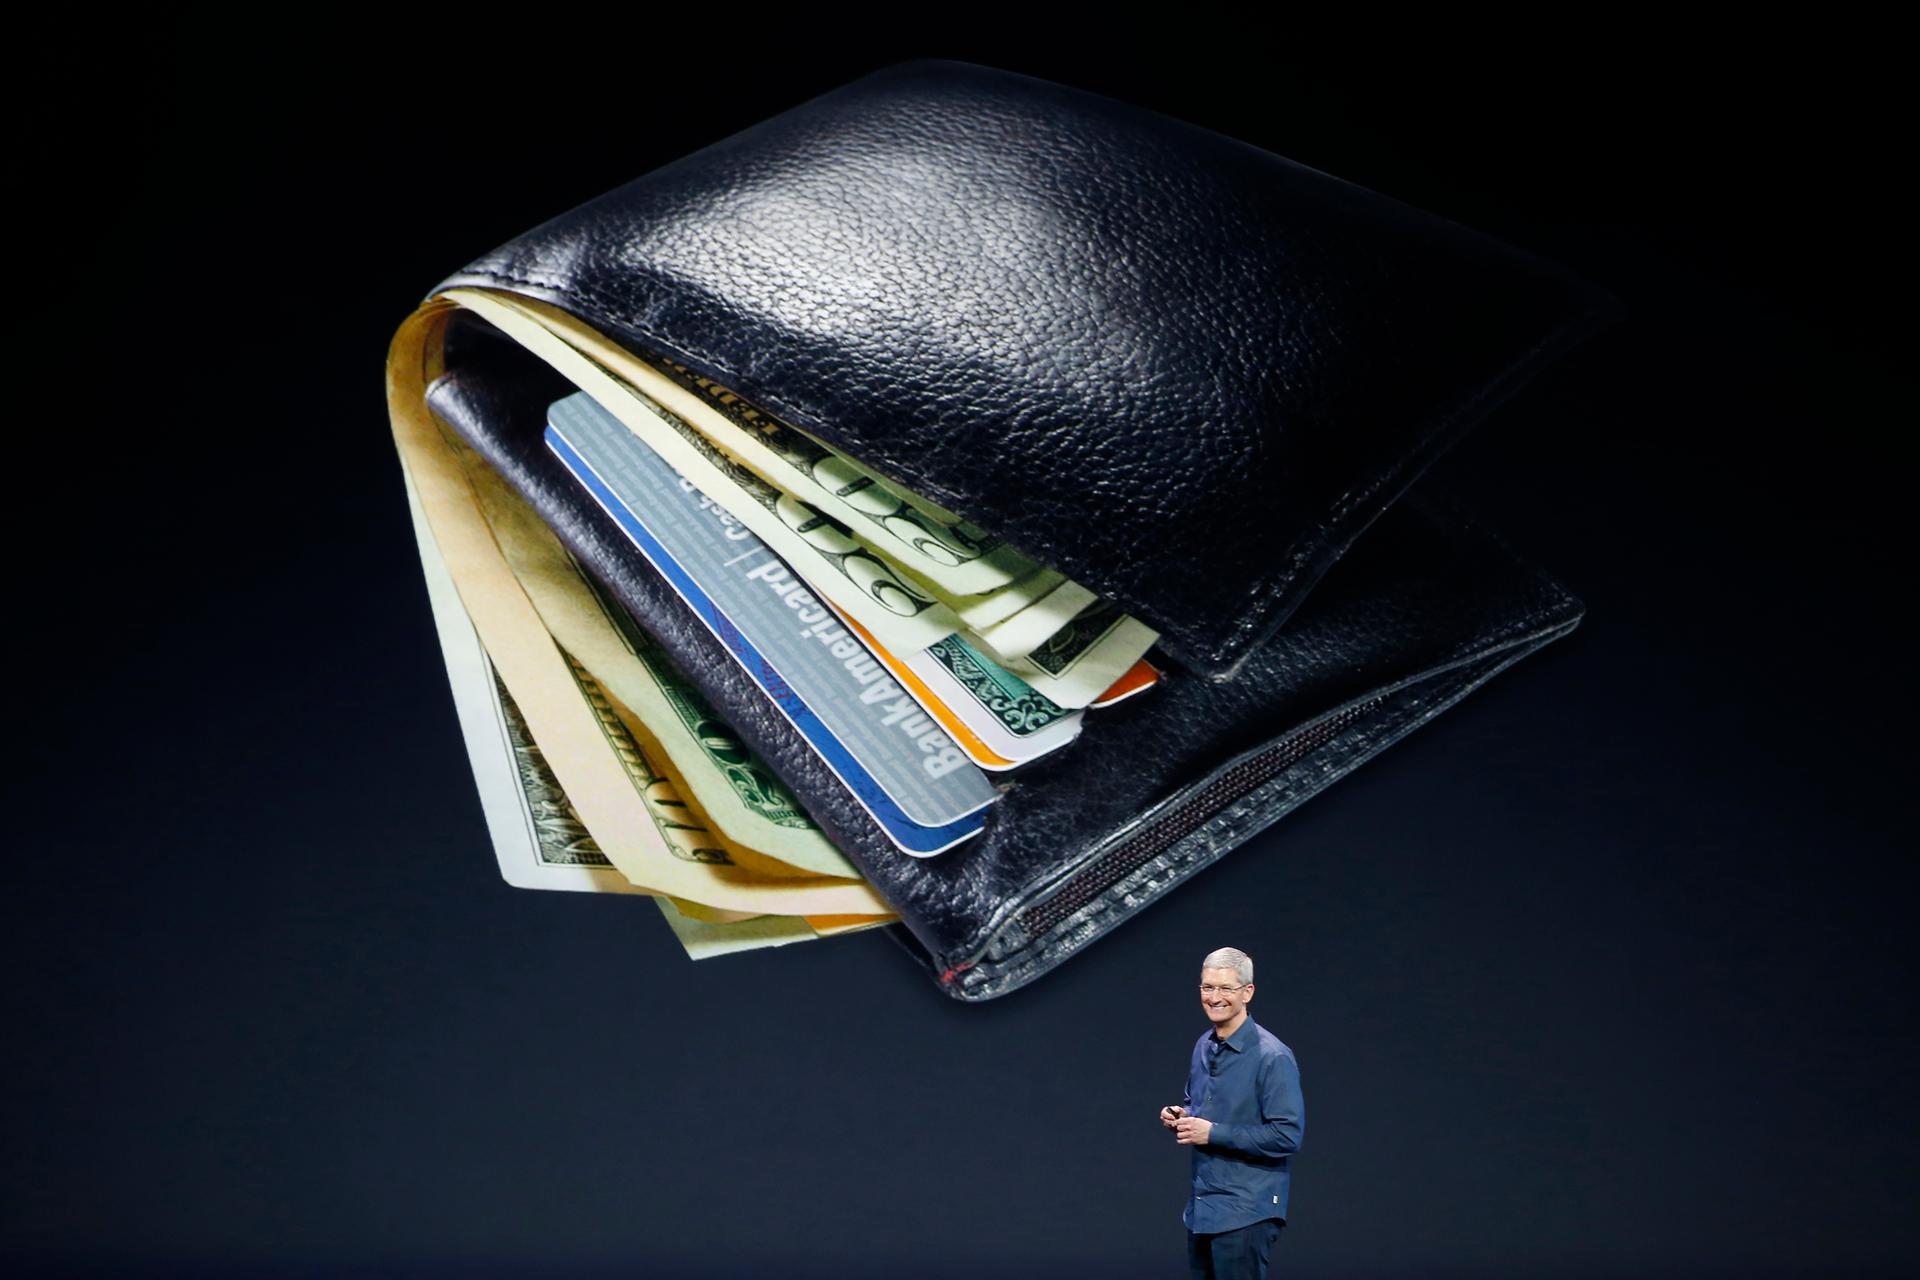 Apple CEO Tim Cook speaks about Apple Pay during an Apple event at the Flint Center in Cupertino, California, on September 9, 2014.